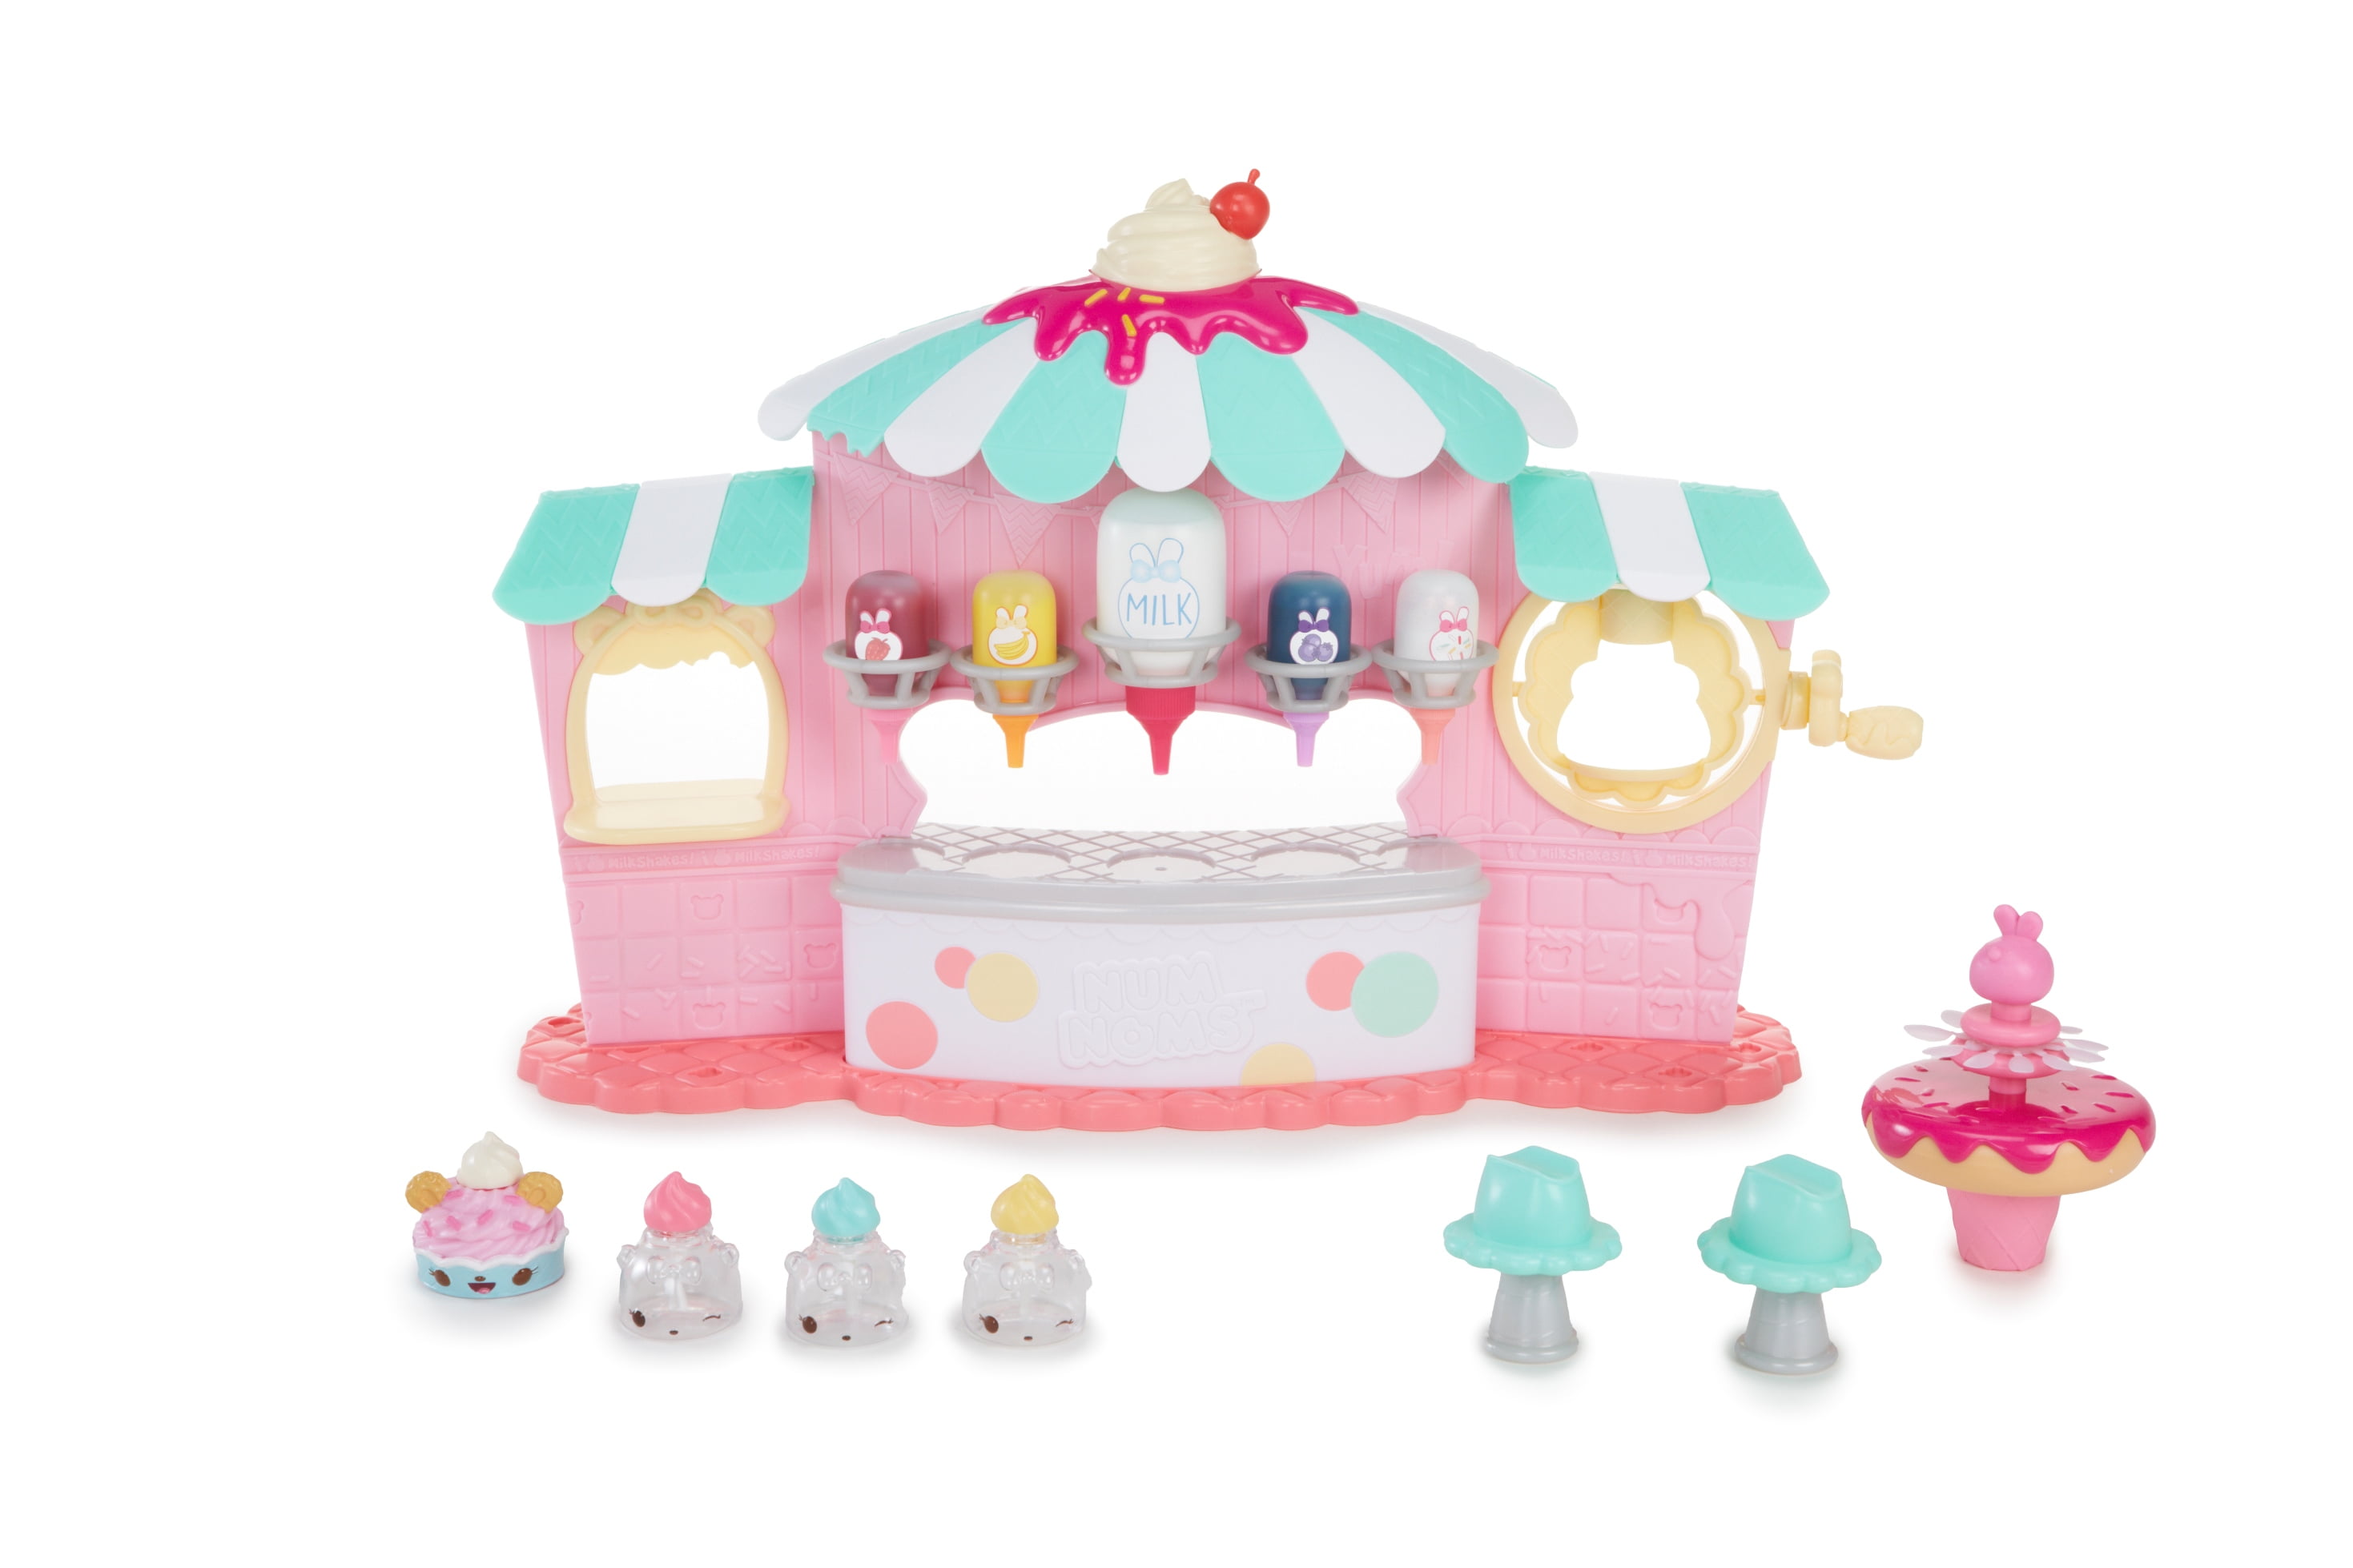 Real Cooking Princess Cakes Deluxe Baking Set B011 for sale online 